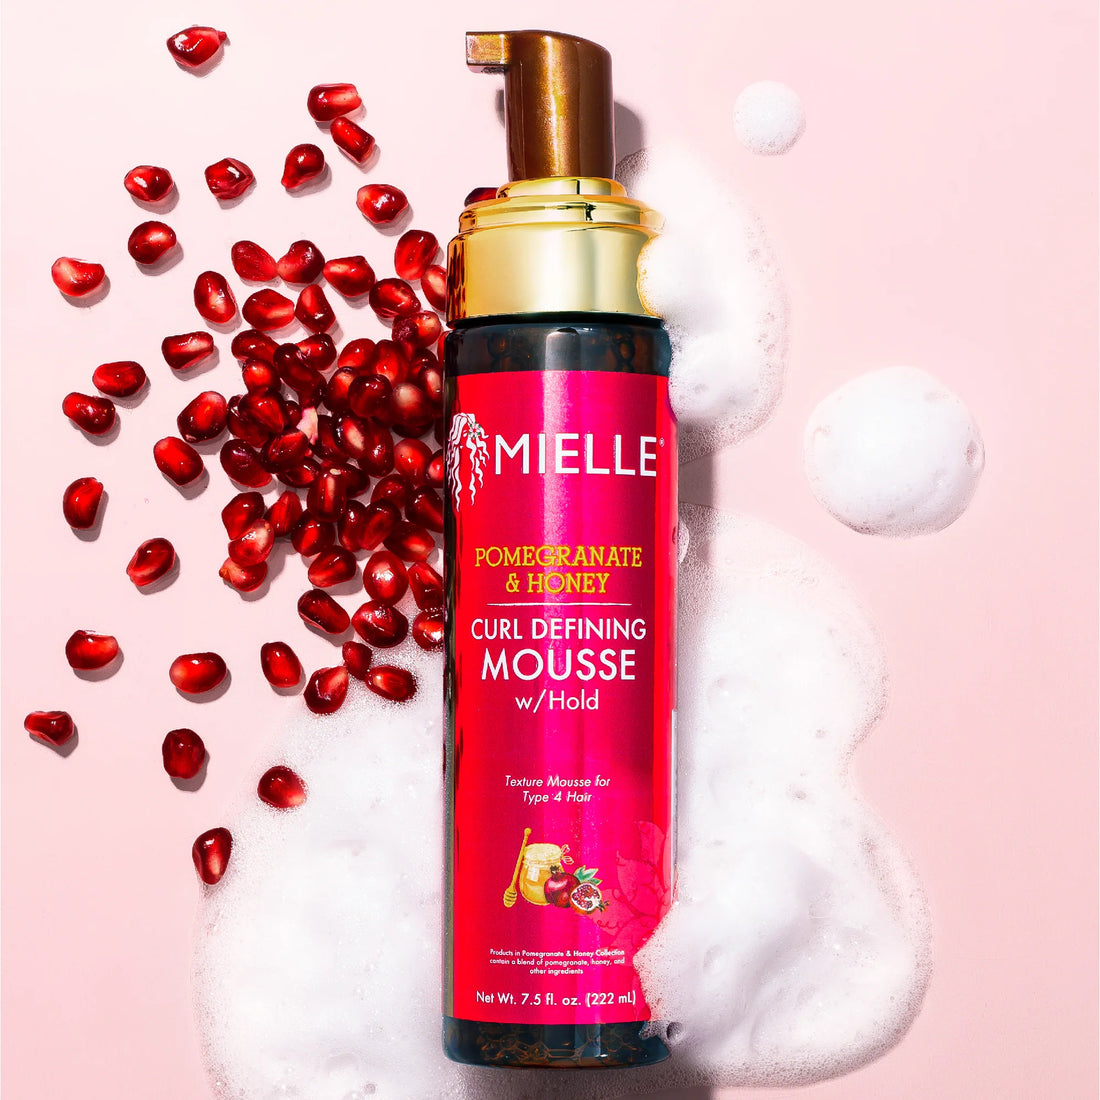 MIELLE POMEGRANATE CURL DEFINING MOUSSE with HOLD - 7.5FL OZ